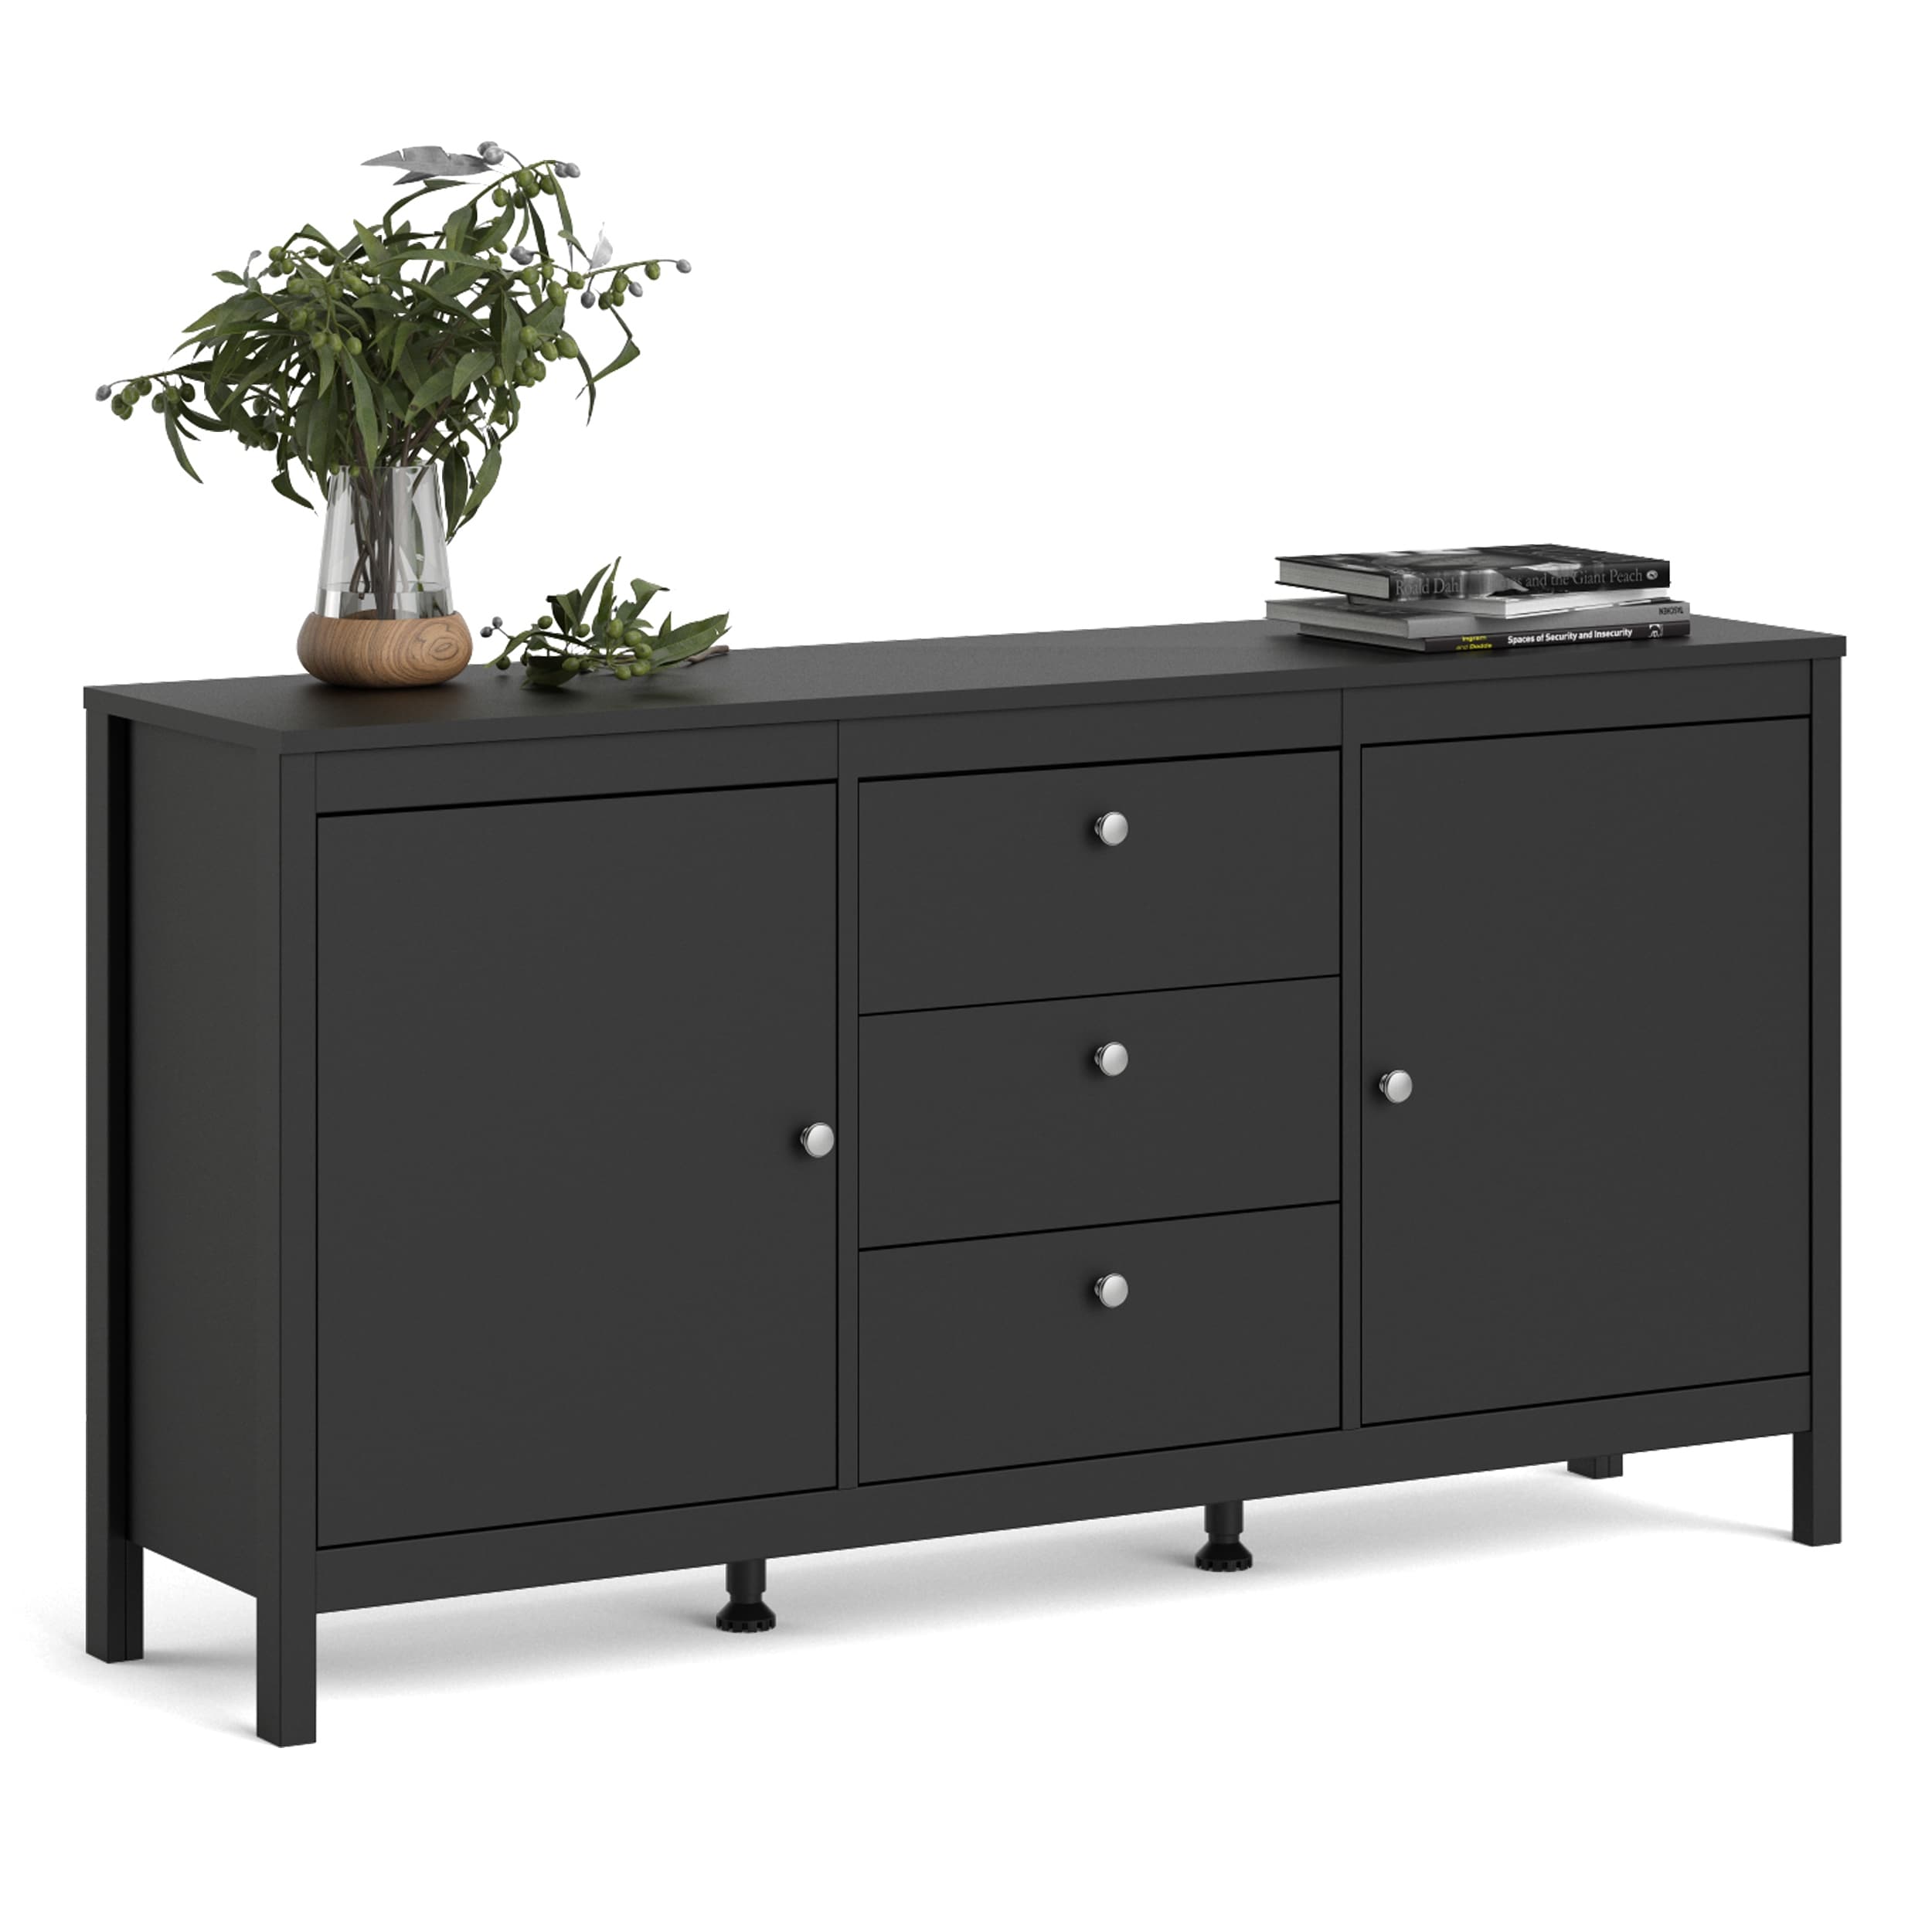 Porch & Den Madrid 2-Door with 3-Drawers & Sale - - On 33673465 Bed Beyond - Bath Sideboard